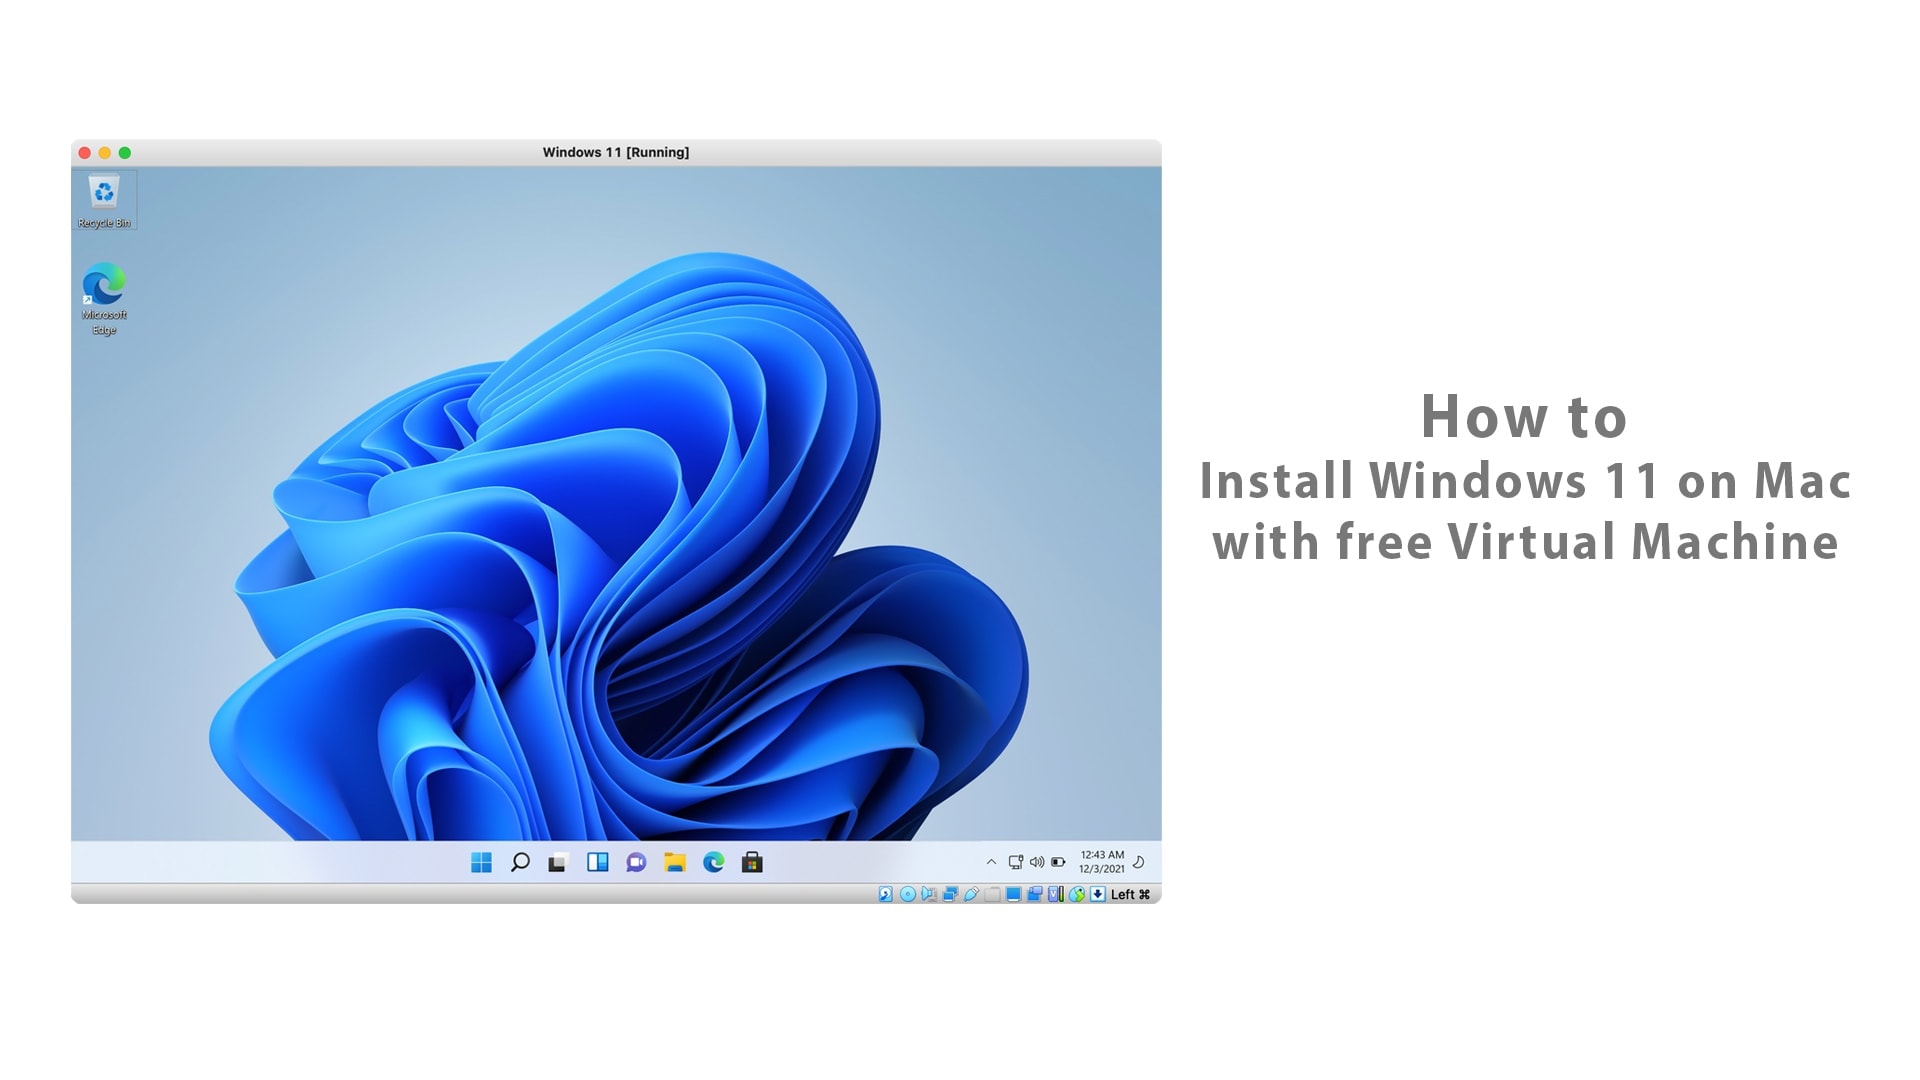 How to Install Windows 11 on Mac with Free Virtual Machine